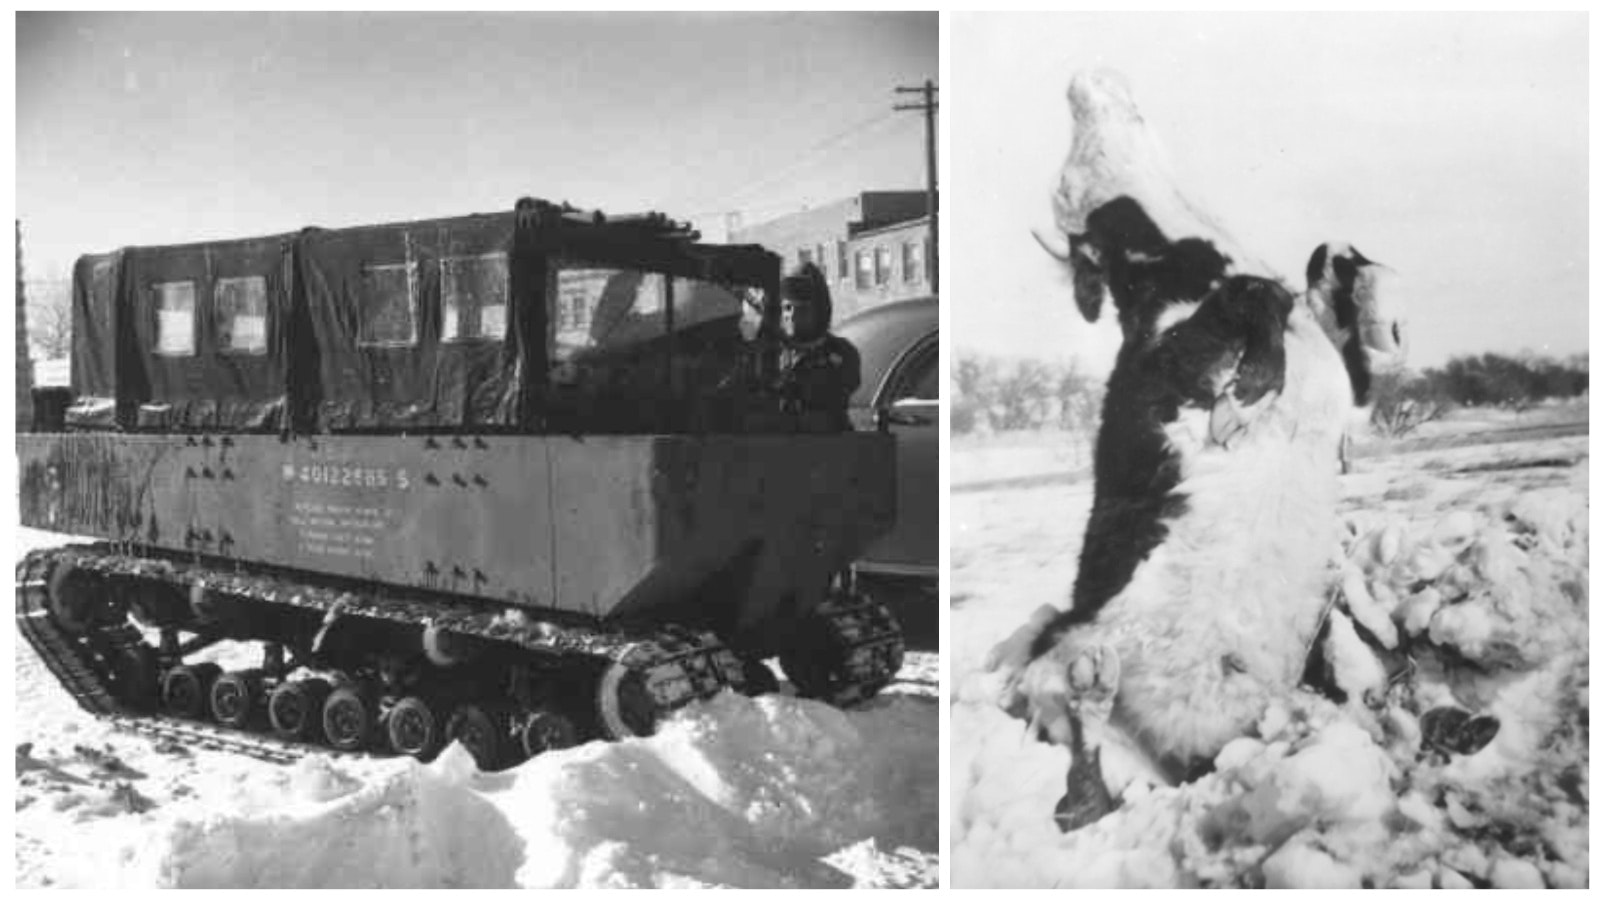 U.S. Army weasels, left, were sometimes the only reliable transportation to otherwise inaccessible places around Wyoming. At right, a cow found frozen upright near Rapid City.